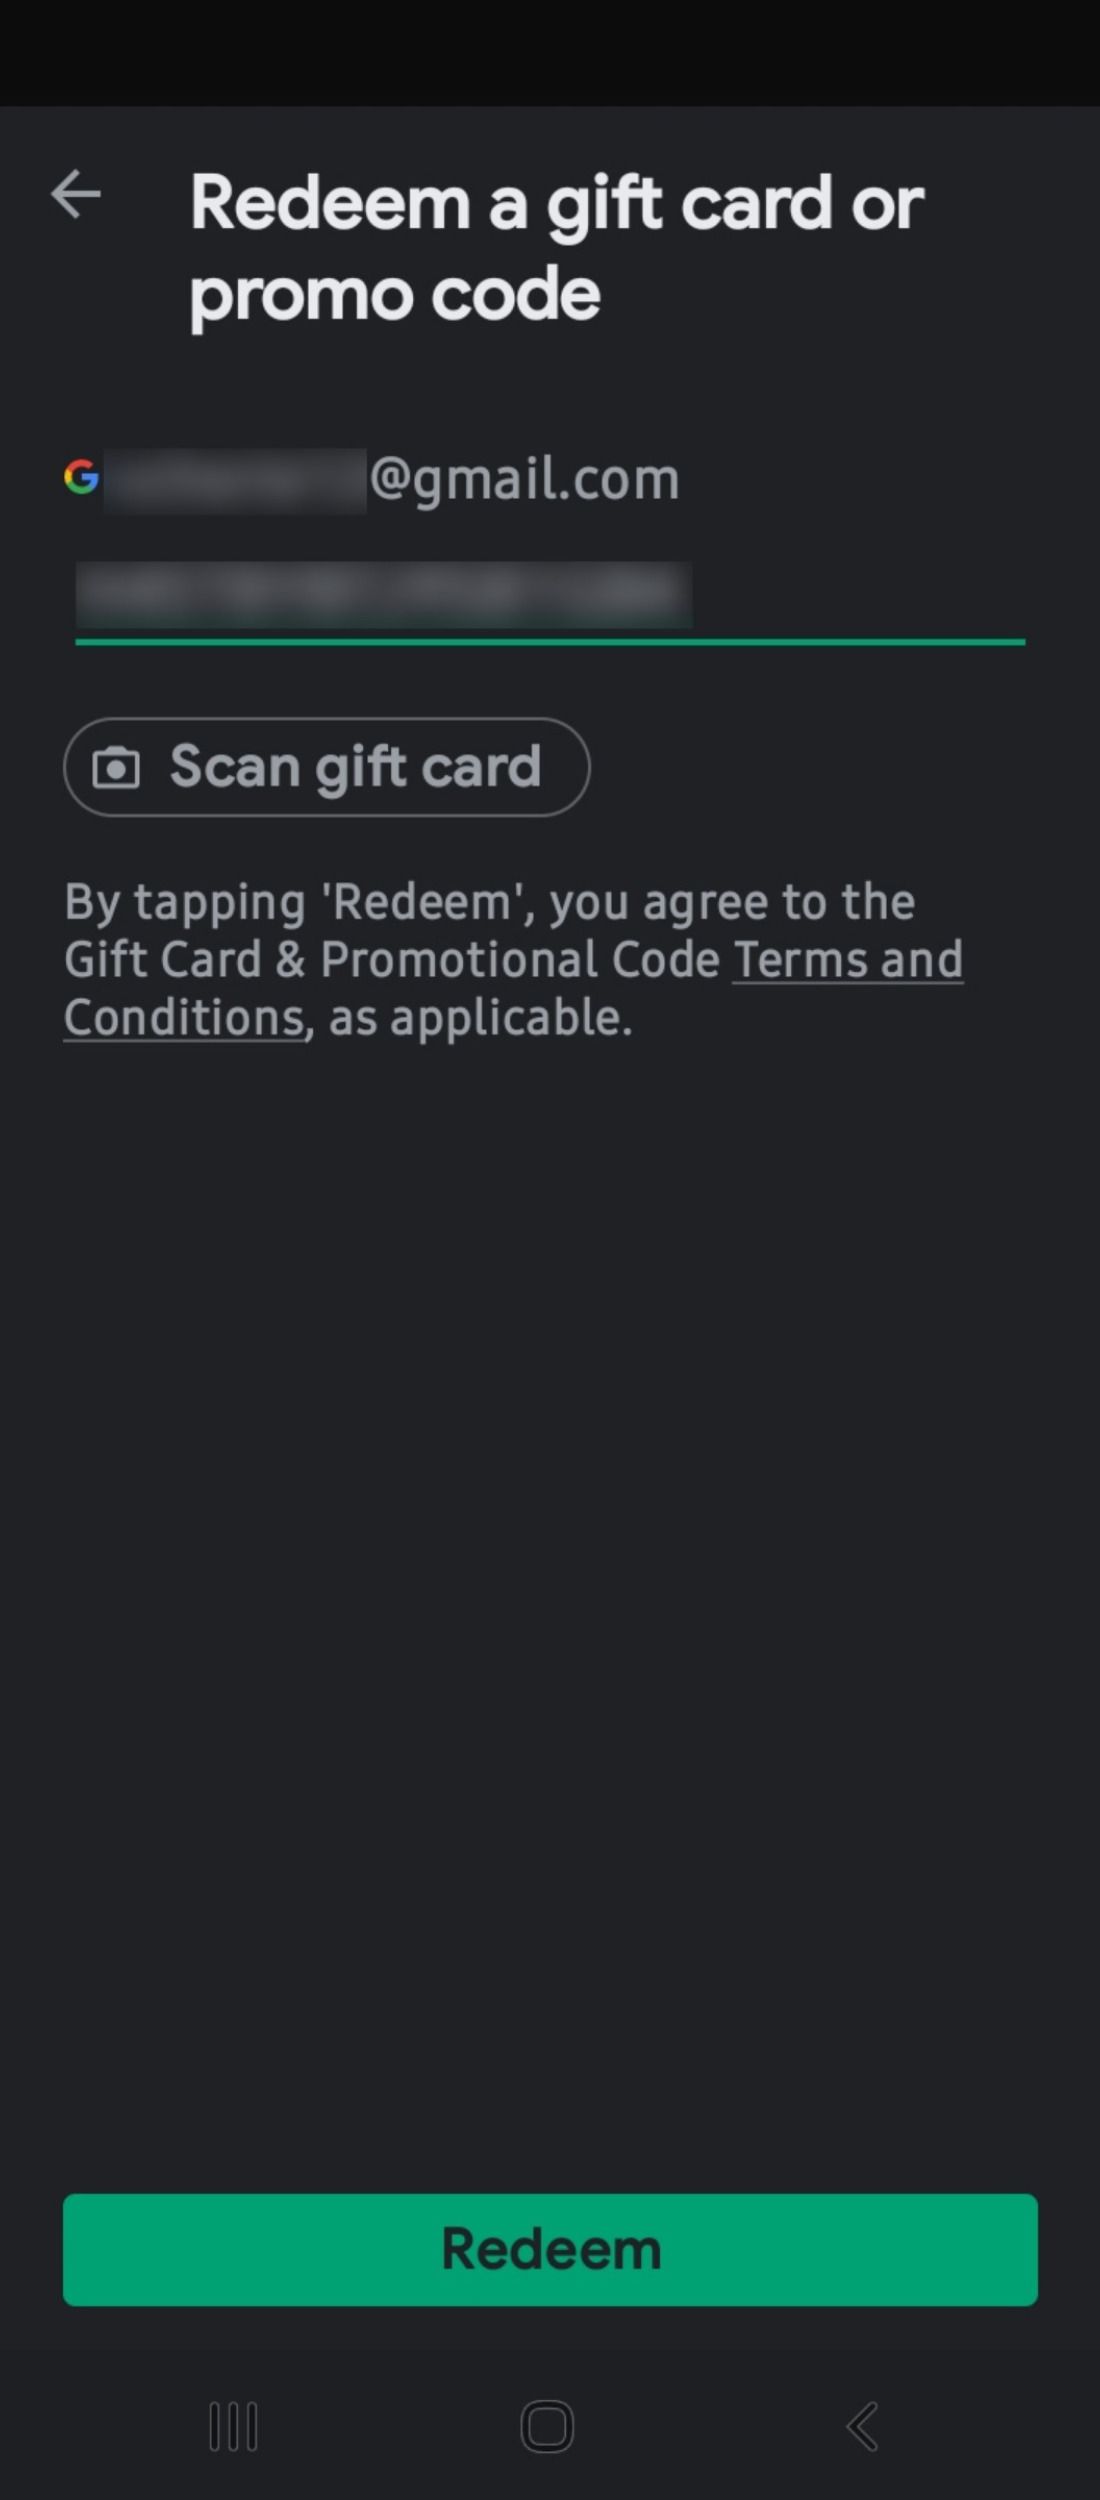 Google Play gift card scam - Realised the scam and redeemed codes before  the scammer, now what? - Google Play Community